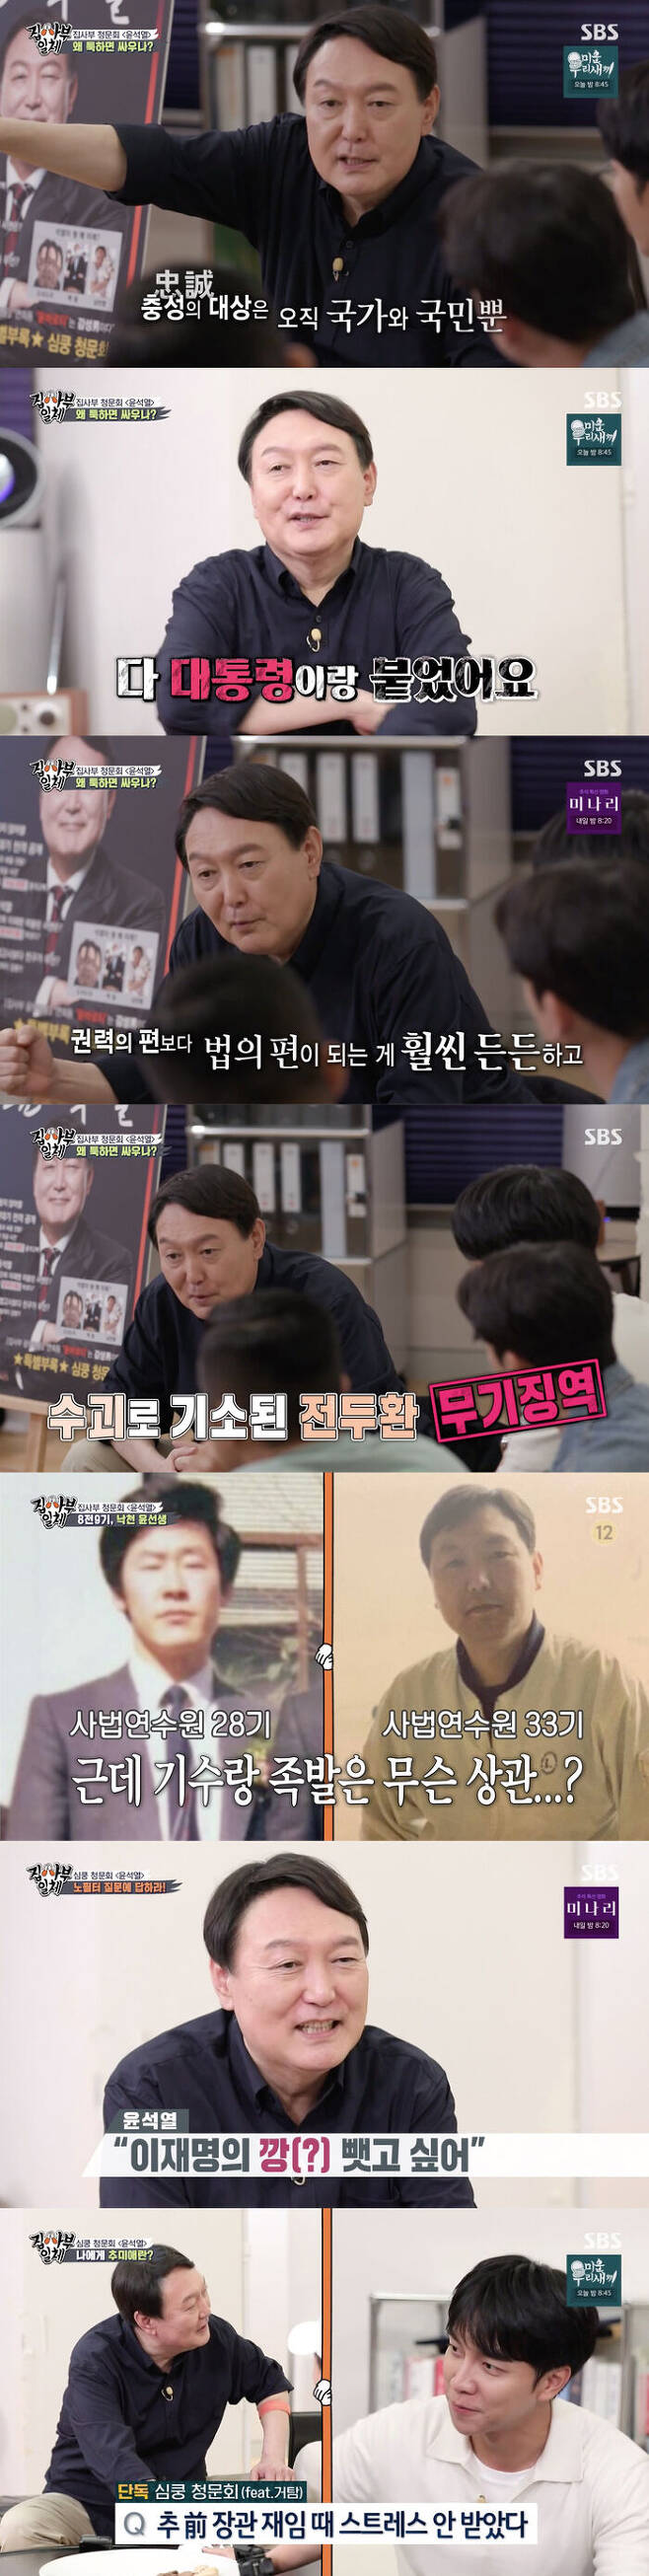 Yoon Seok-ryul has shown the candid human Yoon Seok-ryul.On SBS All The Butlers broadcast on the 19th, the first feature of the presidential candidate Big3 was released on the Young Seak-ryul.On the day of the broadcast, Yoon Seok-ryul told the candid stories at the All The Butlers hearing.He said he did not lie before the hearing, attracting attention.Yoon Seok-ryul said in the past that he was not loyal to people, The prosecutor should not be loyal to people.Here, people are human rights people, he said. In the past, I saw that the new prosecutor would do his loyalty to the prosecutor.It is not loyalty to the prosecutor, but respect. Loyalty should not be subject to the nation and the people, but not others, and loyalty is not what it uses for that, he added.In a series of confrontations with former presidents, Yang asked, Do you want to fight if you see the president?Yoon Seok-ryul said, I am not challenging the president, but I have only handled the case I took in accordance with the law.The president has a lot of ambassadors, but there is no time to test and fight.I think it is much more secure to be on the side of the law than the side of power, he said. If you do not deal with the illegal law of the power, you can not tell the people to keep the law and you are confused.It depends on how the public sees the prosecution, so we have to follow the principle unconditionally. We have no choice. He also said that he was sentenced to life imprisonment for Chun Doo Hwan, who was indicted for a criminal trial against the new military unit of the 12.12 military coup, just before the 5.18th at Seoul National University.He has also been relegated a lot since then, and as a result, he has been nervous about his cooking skills.And Yoon Seok-ryul said he liked to drink with Friend and missed the 28th judicial examination and missed the opportunity to become a motive for Lee Jae-myung and the Judicial Research and Training Institute.He said, I went to the Friendship before the test even in the last test.I studied the book for fun on the way to build the ship, but the problem I saw at that time was presented as a criminal procedure law problem, and I passed it. Also, Yoon Seok-ryul said, I am a person who does not give up even if I cry hard.I do not have much talent, but I am not a person who gives up easily even if there is a difficulty or crisis. I have been living a very nervous life while working as a prosecutor.Even if I did nine, I can pride myself on being fierce in my work, and I am confident in one of my work.I am confident that politics is a job and I am confident that I will succeed. At the subsequent in-depth hearing, Yoon Seok-ryul said frankly that he thought he was a little better than Lee Nak-yeon and Lee Jae-myung, and that he wanted to act on Lee Nak-yeons meticulous and Lee Jae-myungs gang.And when asked if Chu Mi-ae had received a stress during his tenure as a secretary of state at the Justice Department, he replied, What would be a stress?However, as a result of the lie probe, it was false and sweated.He also said that he is constantly paying attention to his habits that he did not recognize, such as Doridori and Swim. I wanted to see the video, but I was really surprised.I am the 20th president, he said, I started because I am confident.I have to show my appearance in the future, but I believe that I will support the people with the belief that I will do well because I have seen good work in the inspection. And Yoon Seok-ryul cited honey-bob and hiding for never being president: Its the basic thing for people to share rice is communication.I will always eat and communicate with many people. He added, I will never hide in front of the people.I will stand ahead of the people whenever there is something that I did well or not. Finally, he said, I hope that Corona 19 will be over and that I will sit down with the young people and share a draft beer and ring the golden bell and become news.He also said, As an older generation, I want to say sorry to young people, I am sorry that I can not hope for the future of the country, but do not lose my courage.On the other hand, on the same day, Yoon Seok-ryul also revealed the aspect of Yun Paroti, who is good at singing and the aspect of Yun-joo who likes cooking so that he smiles at the story of cooking.